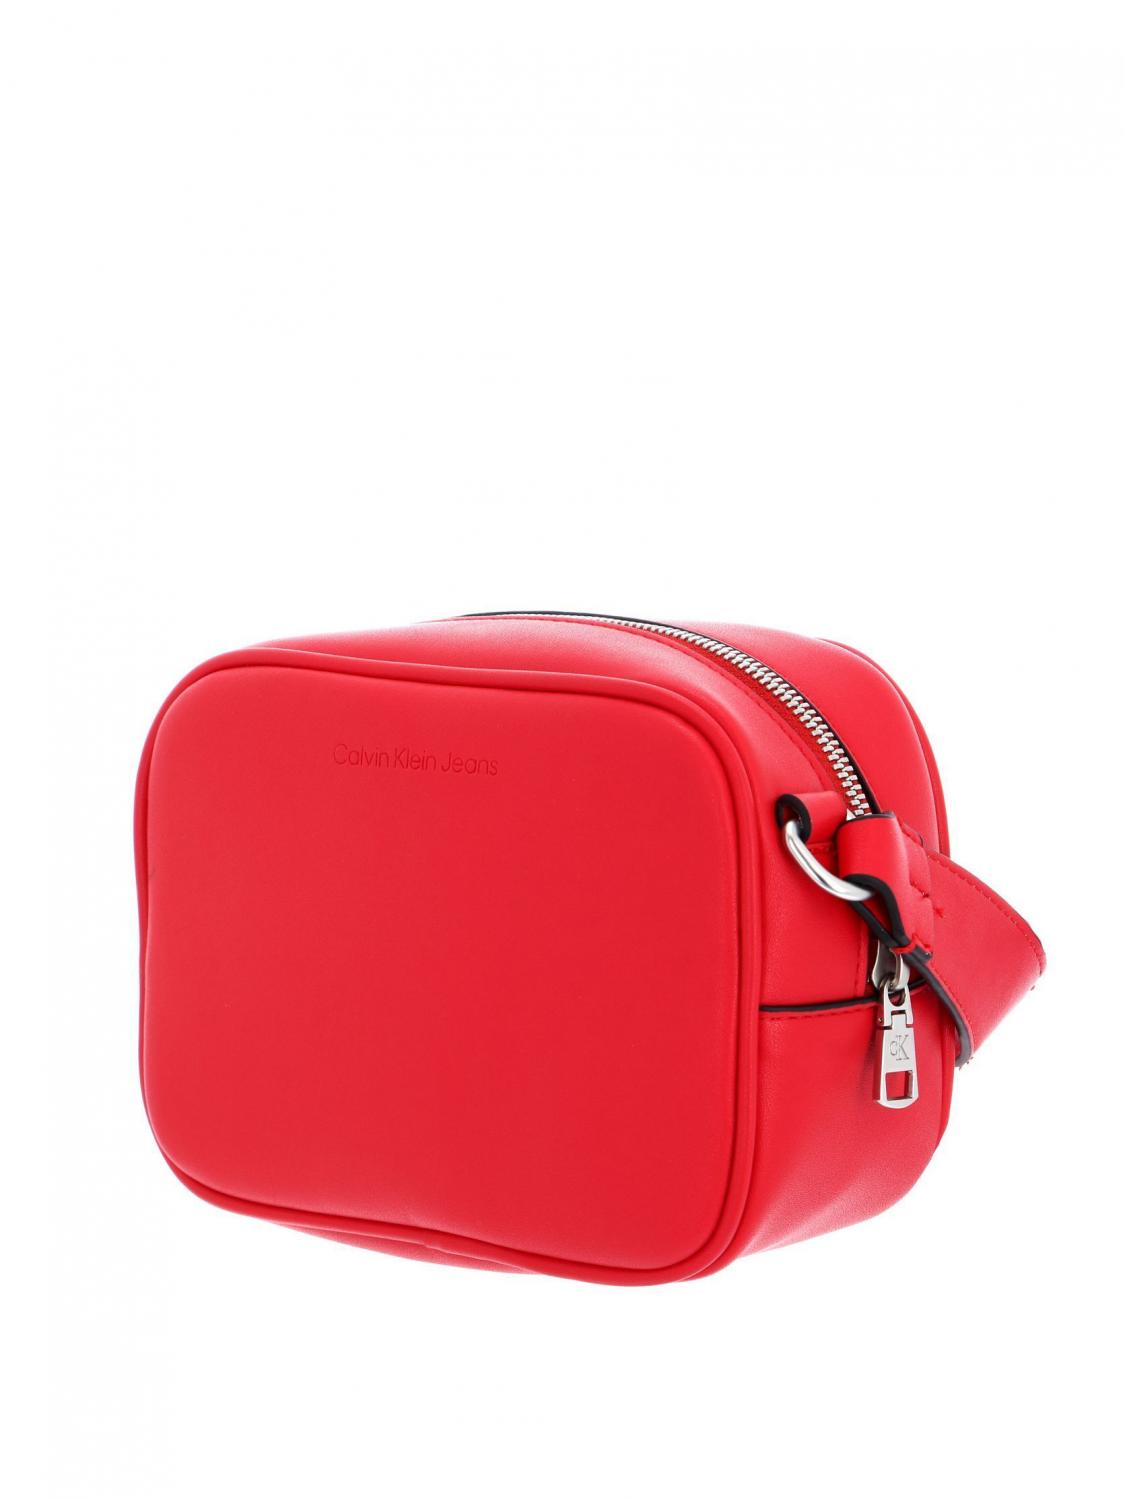 Calvin Klein Ck Jeans Sculpted Mono Camera Bag With Shoulder Strap Candy  Apple - Buy At Outlet Prices!